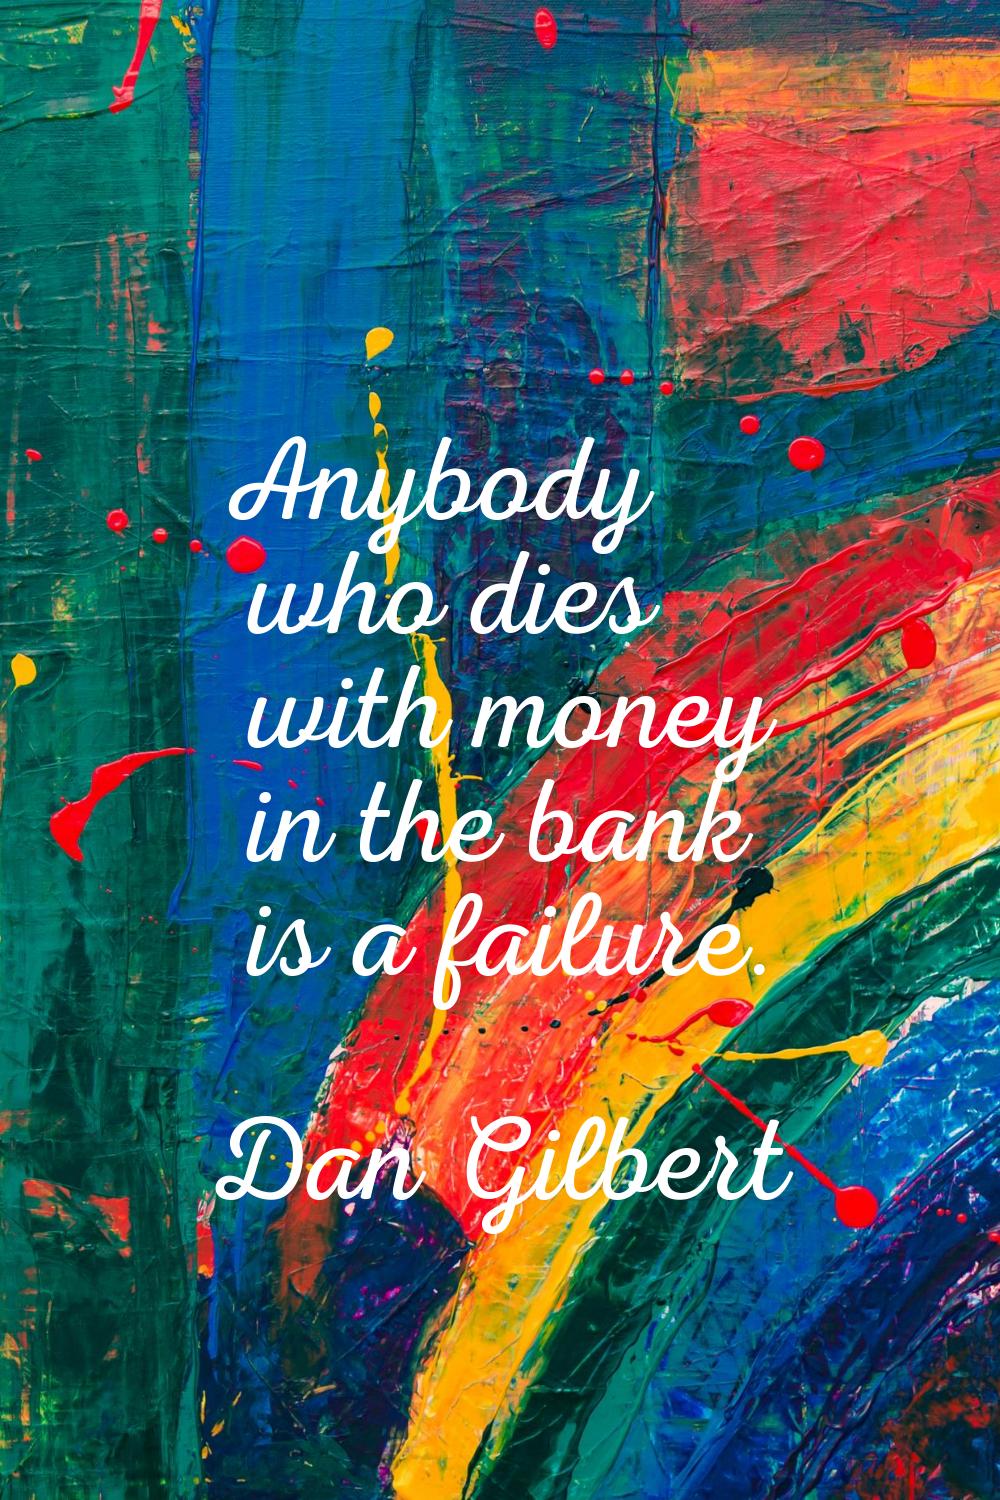 Anybody who dies with money in the bank is a failure.